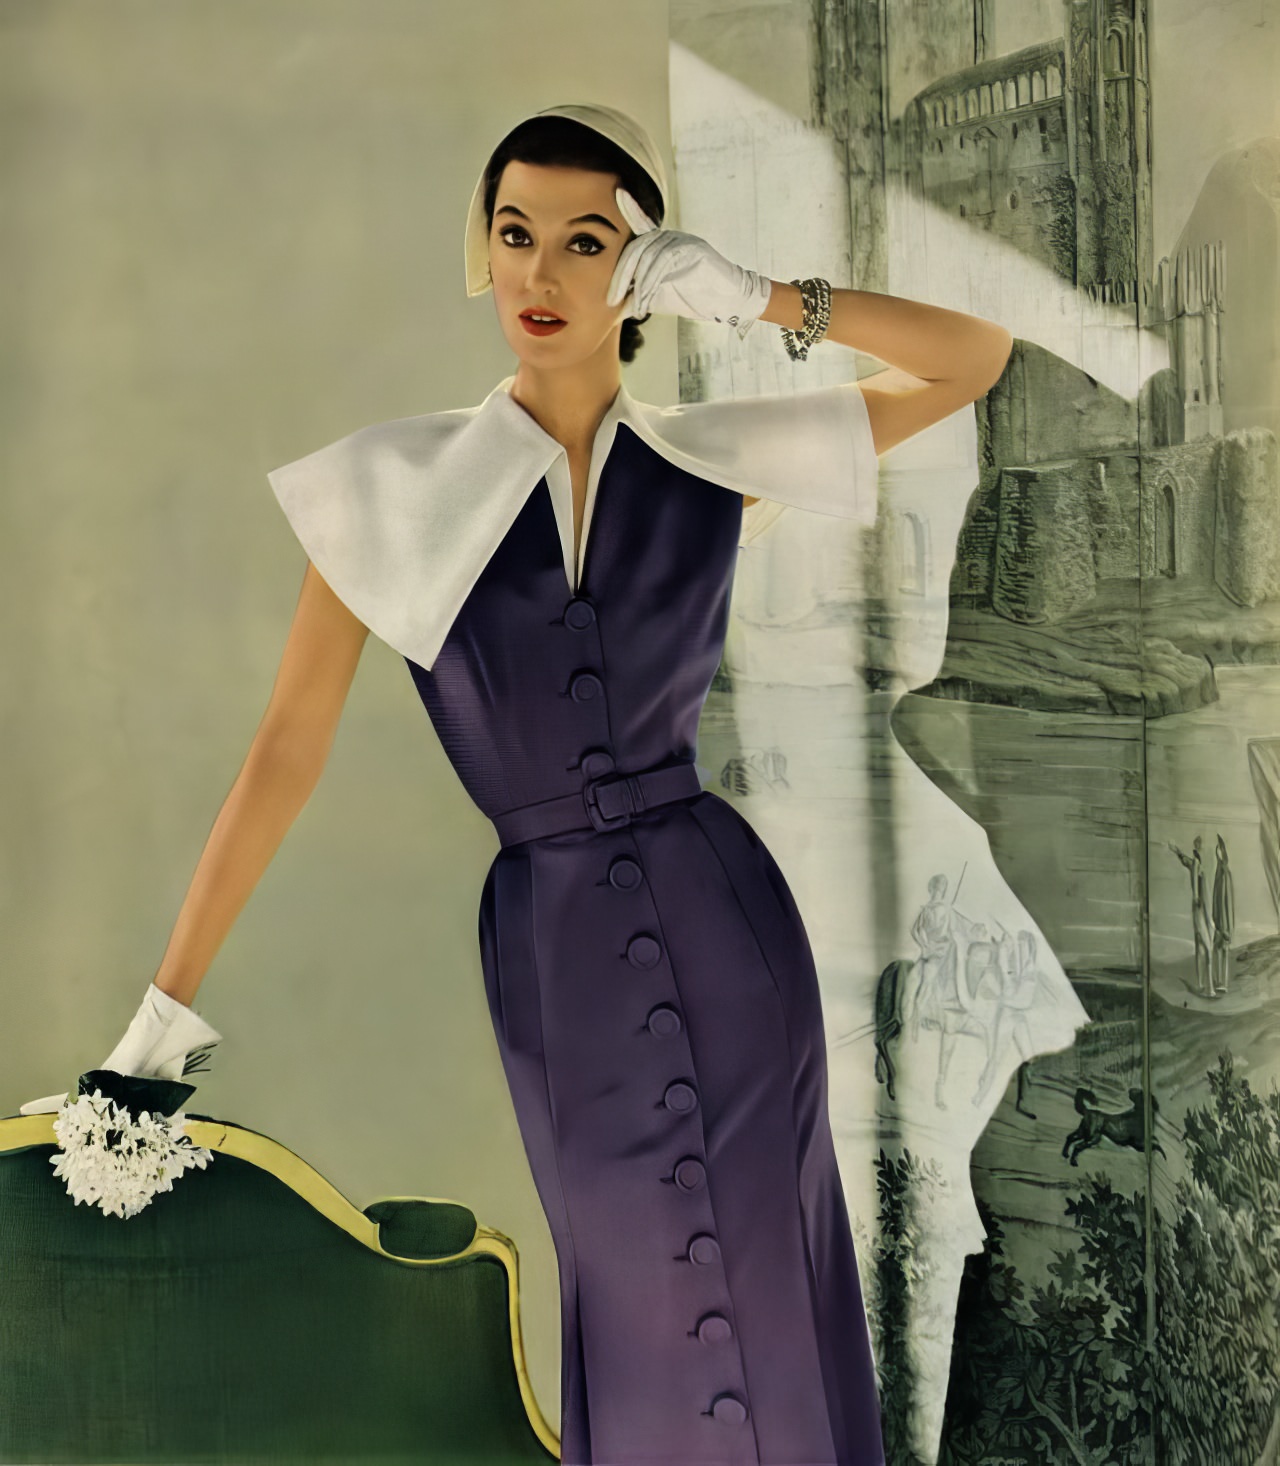 Barbara Mullen in a sleeveless crêpe and Enka rayon dress by Adele Simpson, Vogue, April 1, 1951.